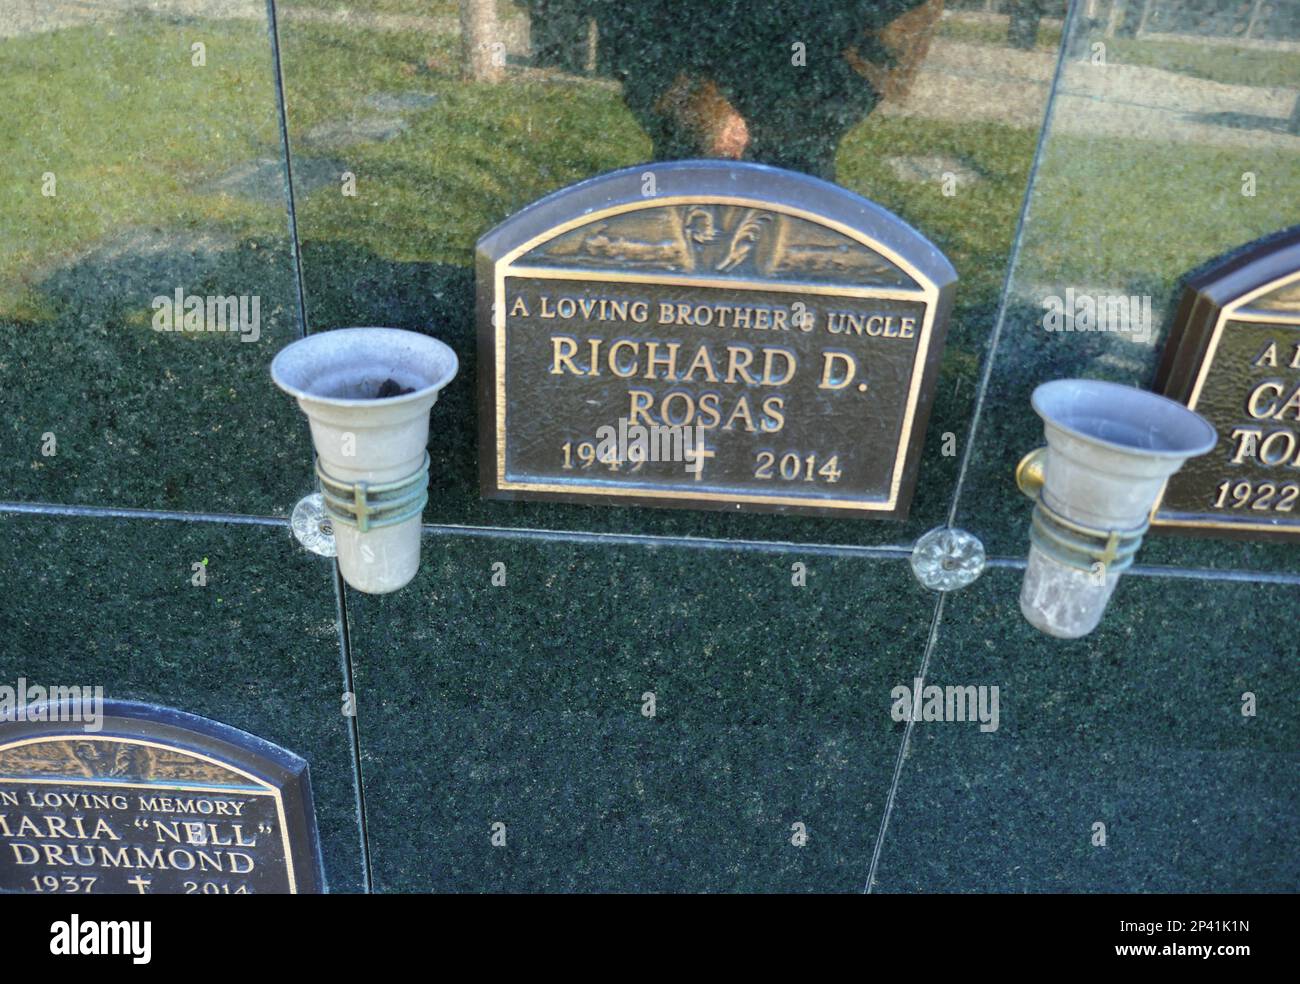 Long Beach, California, USA 2nd March 2023 Musician Rick Rosas's Grave at All Souls Cemetery on March 2, 2023 in Long Beach, California, USA. Photo by Barry King/Alamy Stock Photo Stock Photo